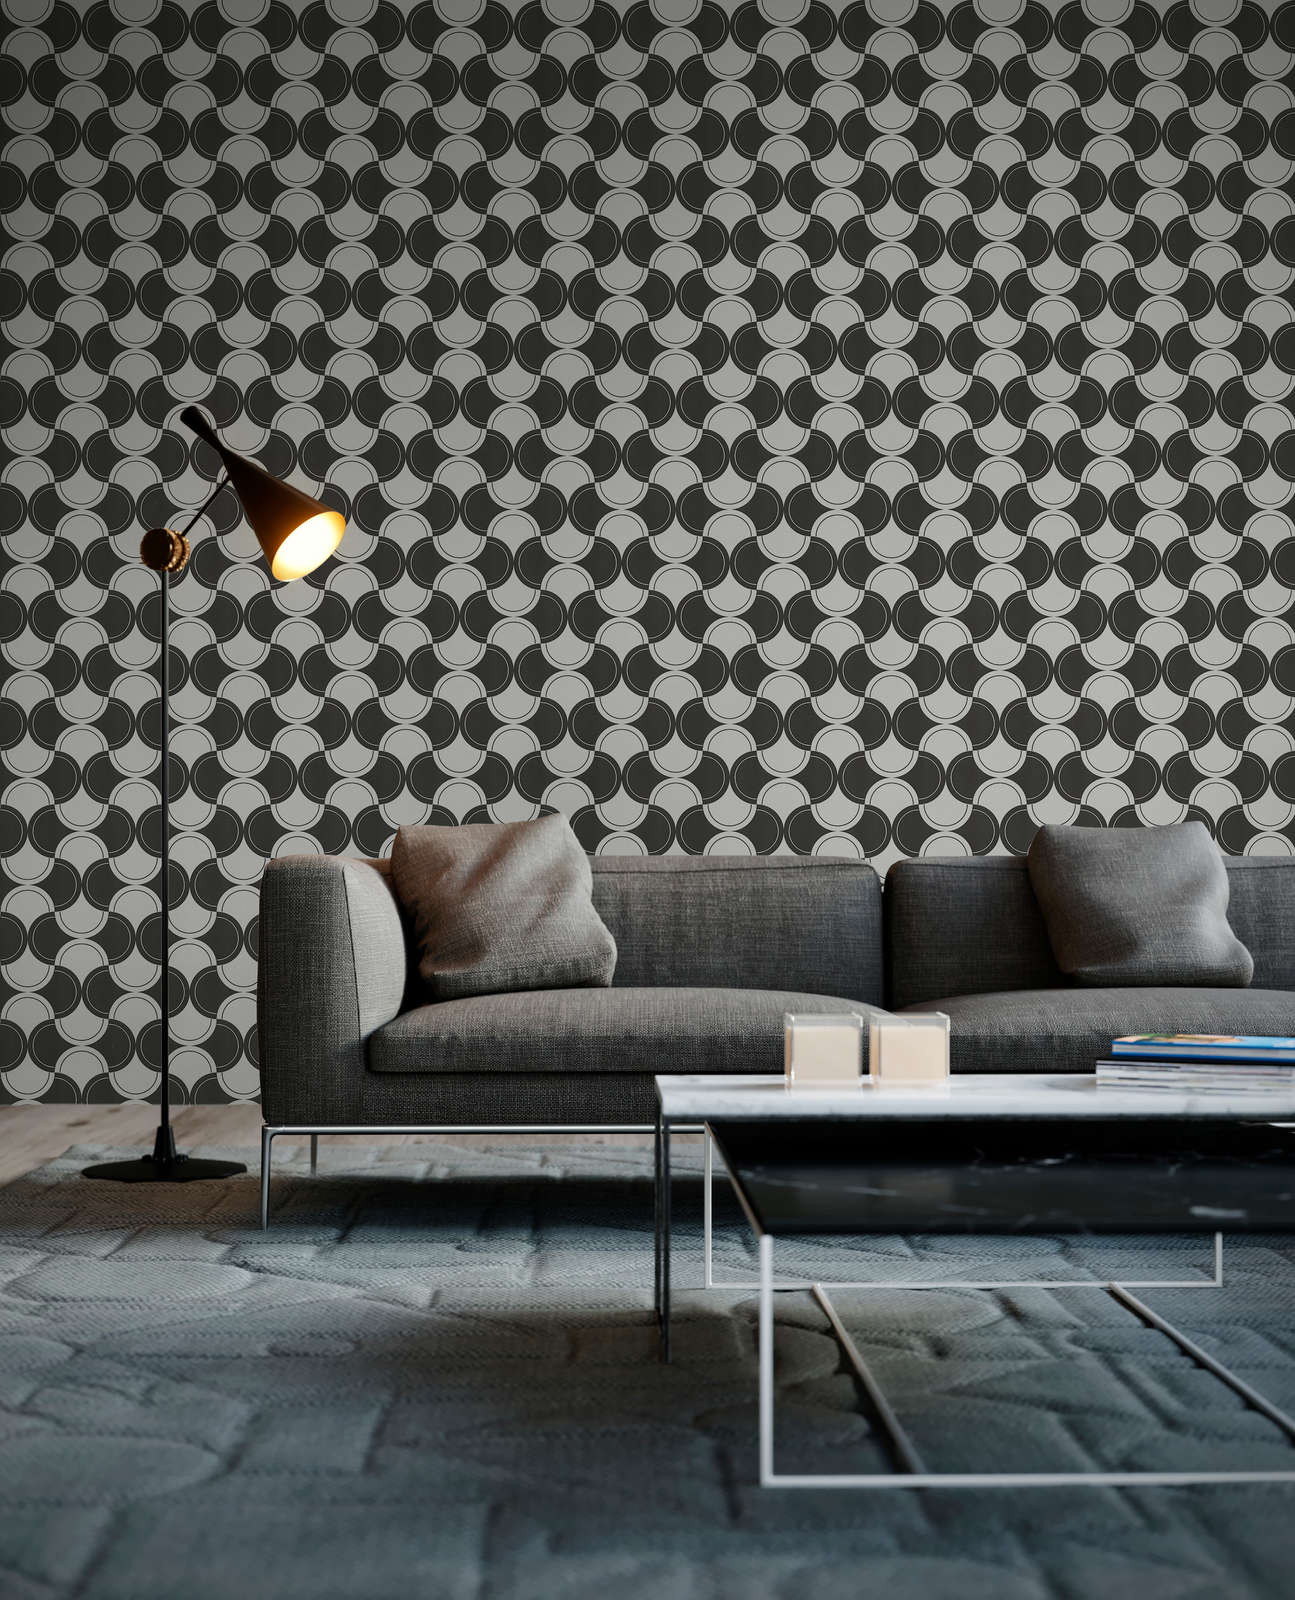             Non-woven wallpaper retro pattern with circles 70s style - black and white
        